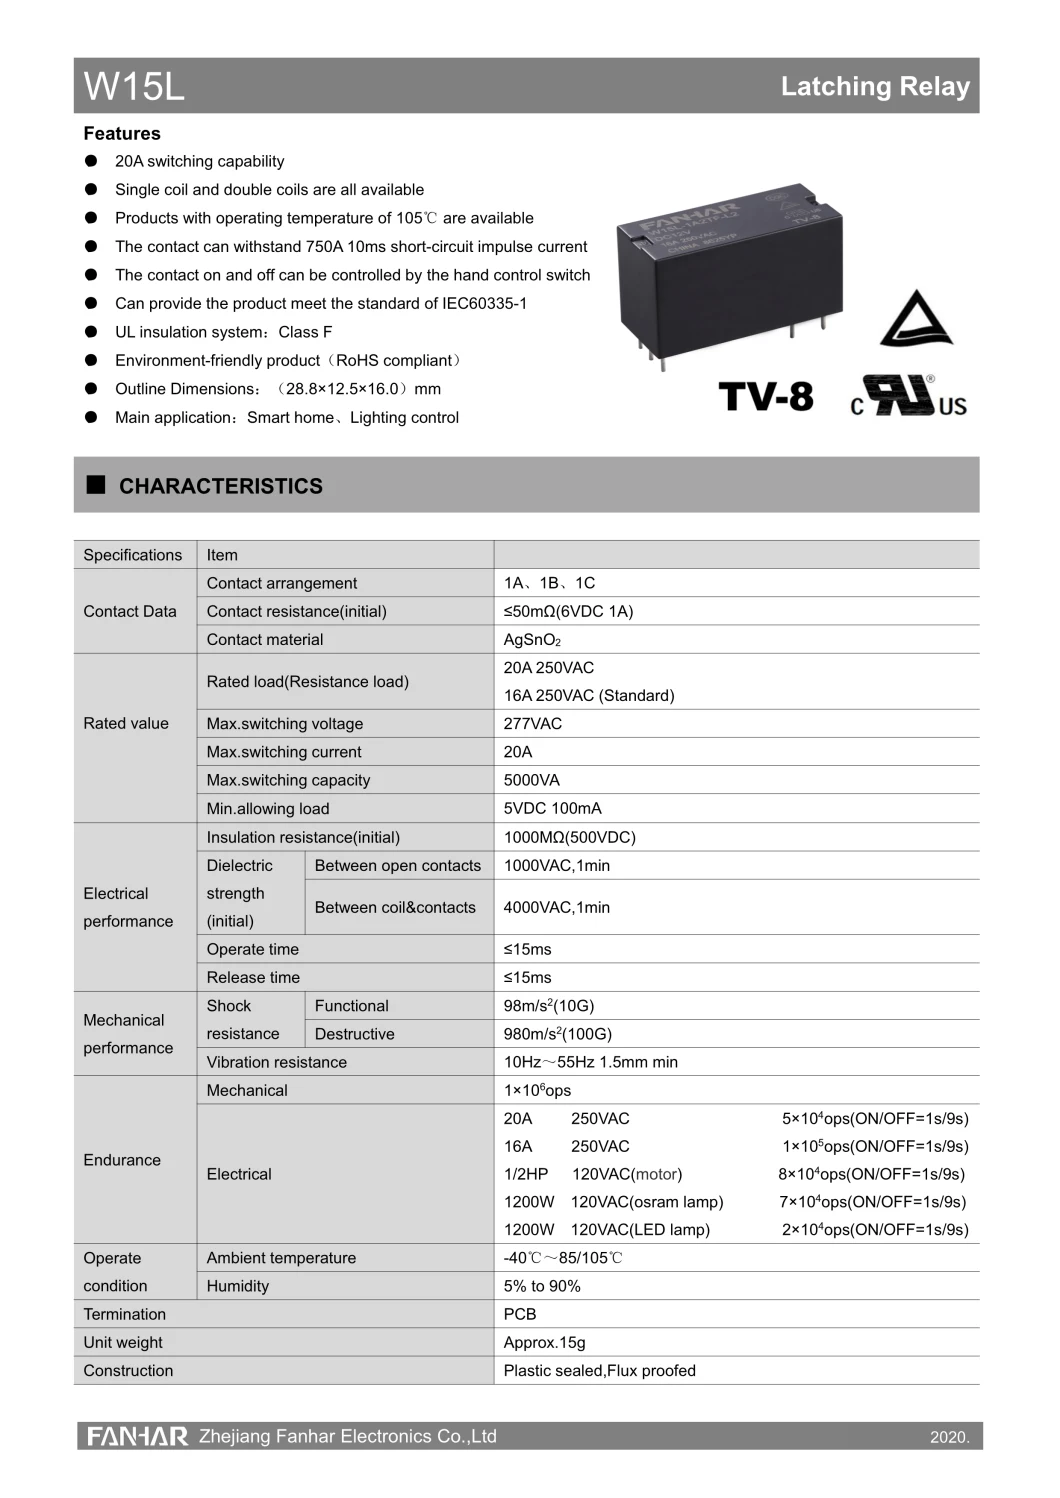 Agsno2 Contact Material Latching Relay for AMR System